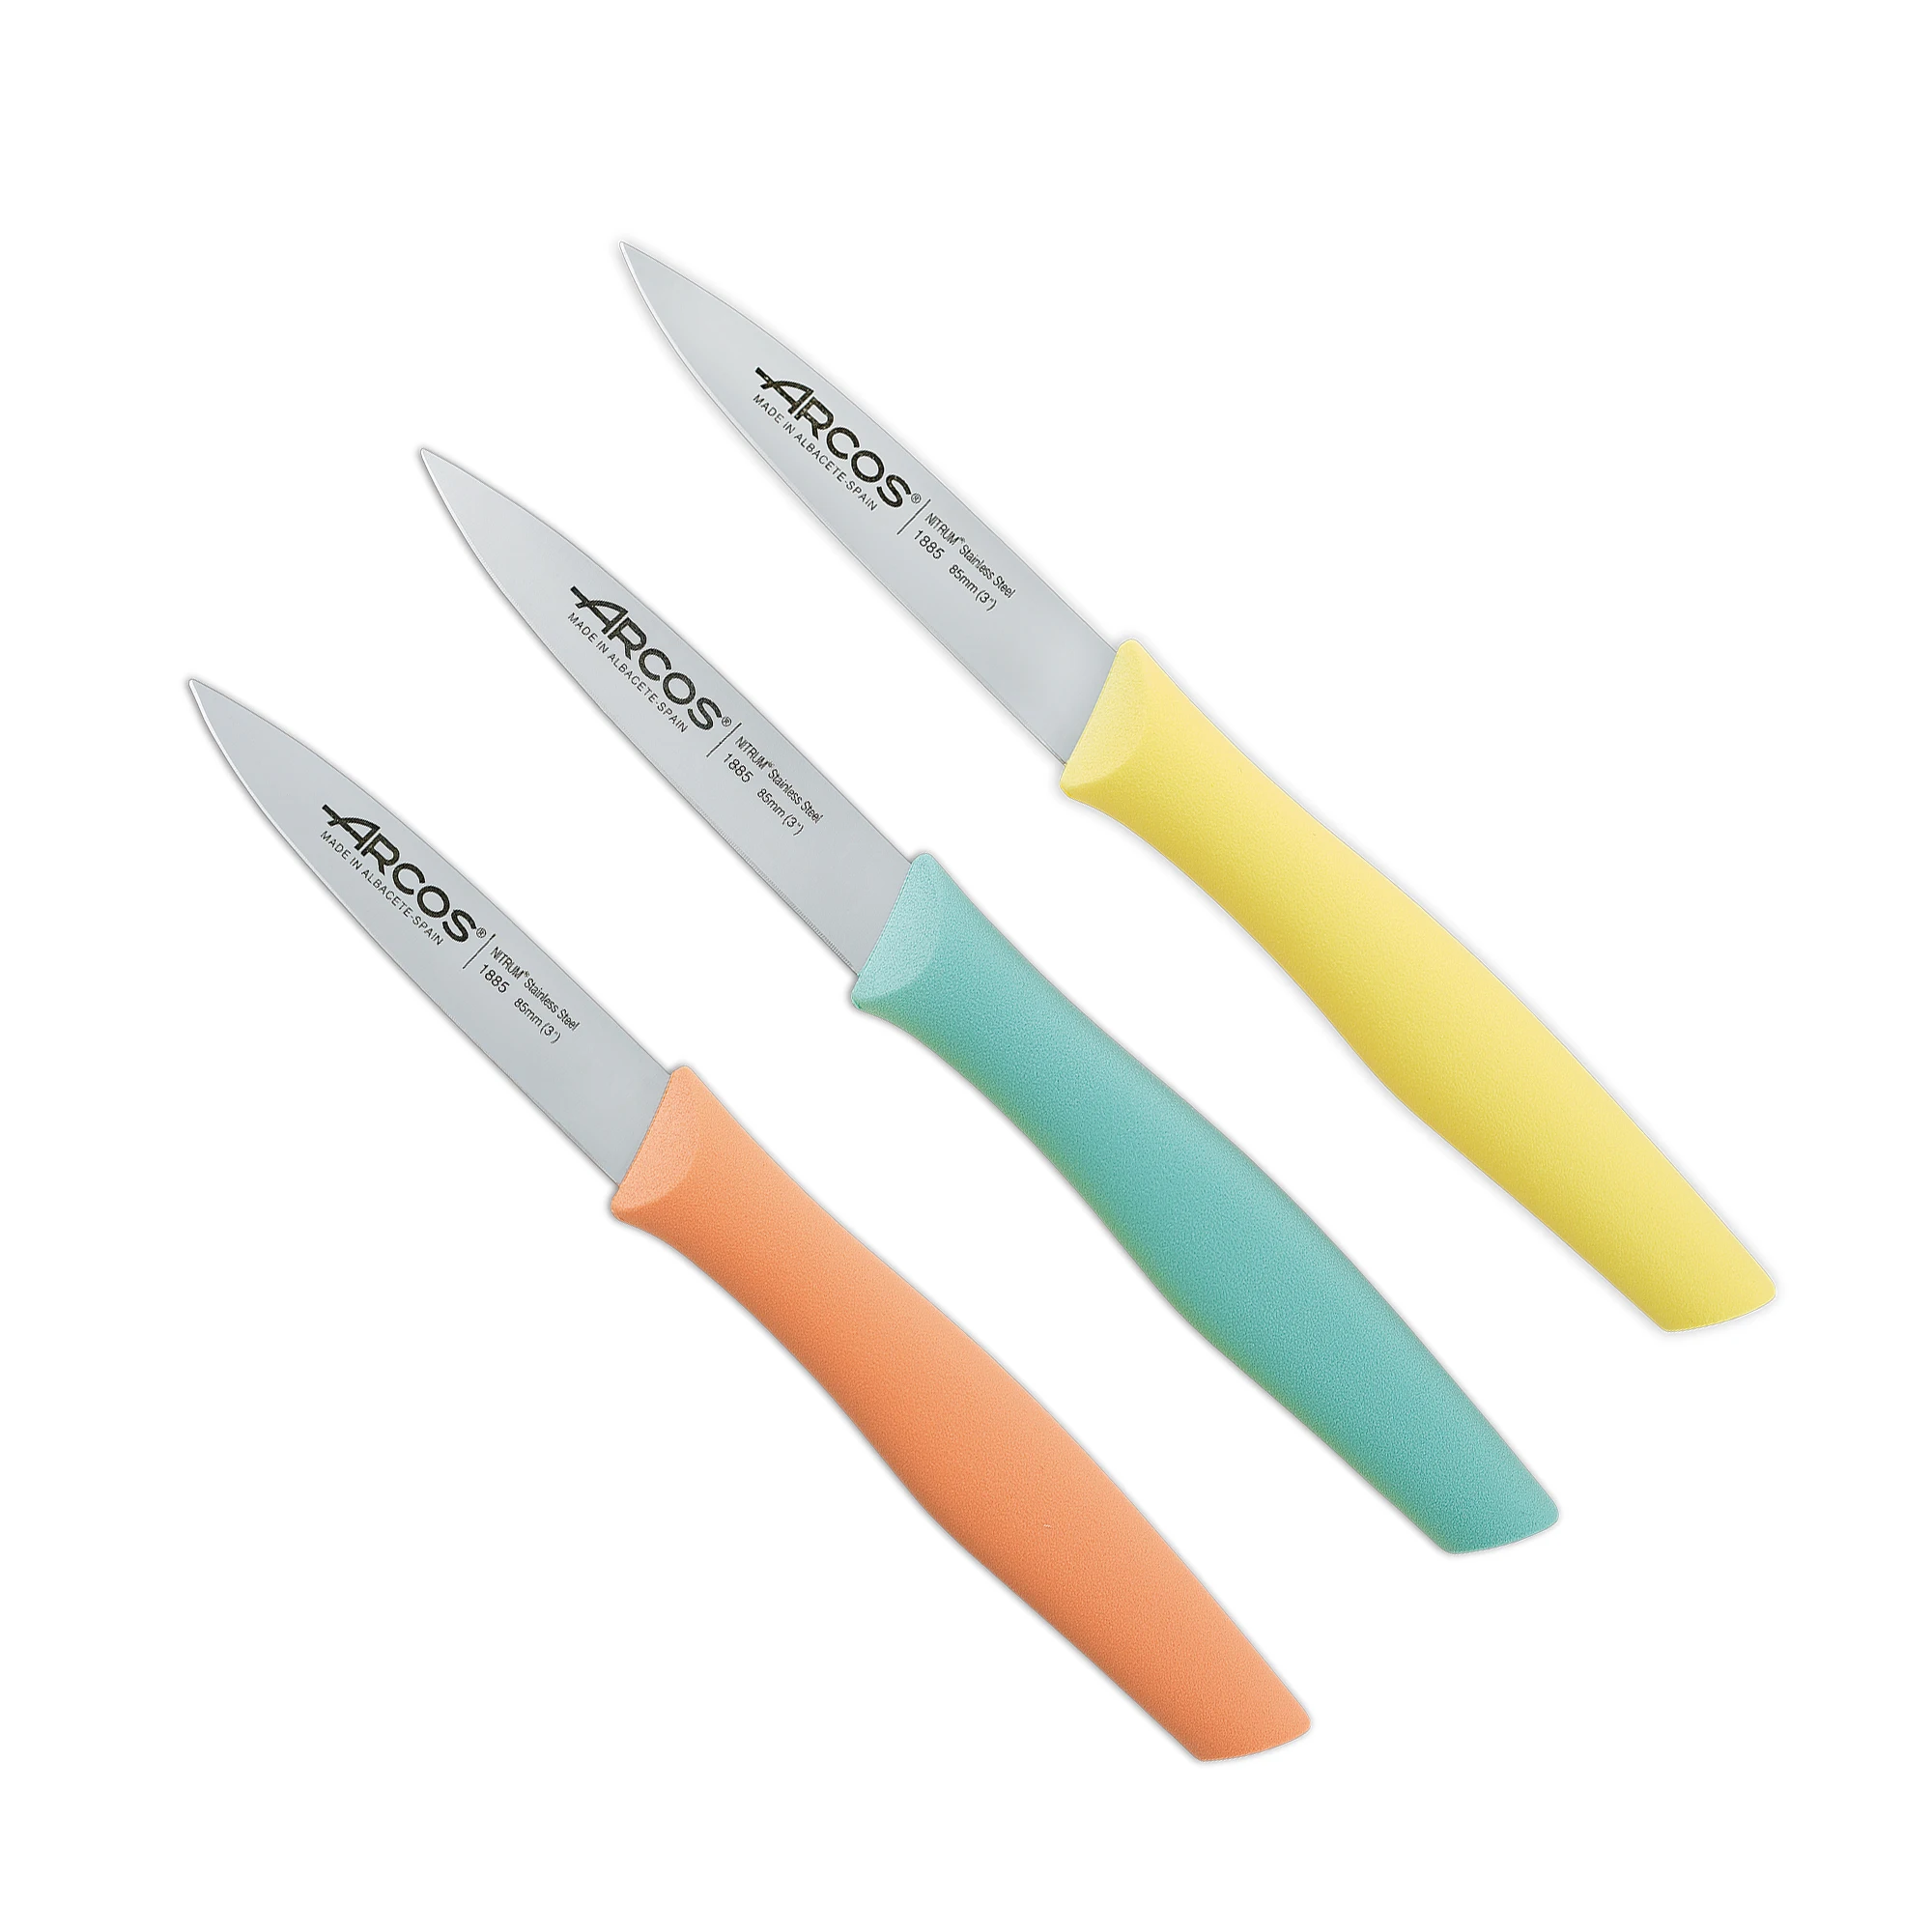 Bows professional kitchen knives set, 3 colors, yellow, turquoise and orange, peeling knife, blade 85 mm stainless steel Nitrum, eco-friendly packaging, cutlery colors, potato peeler